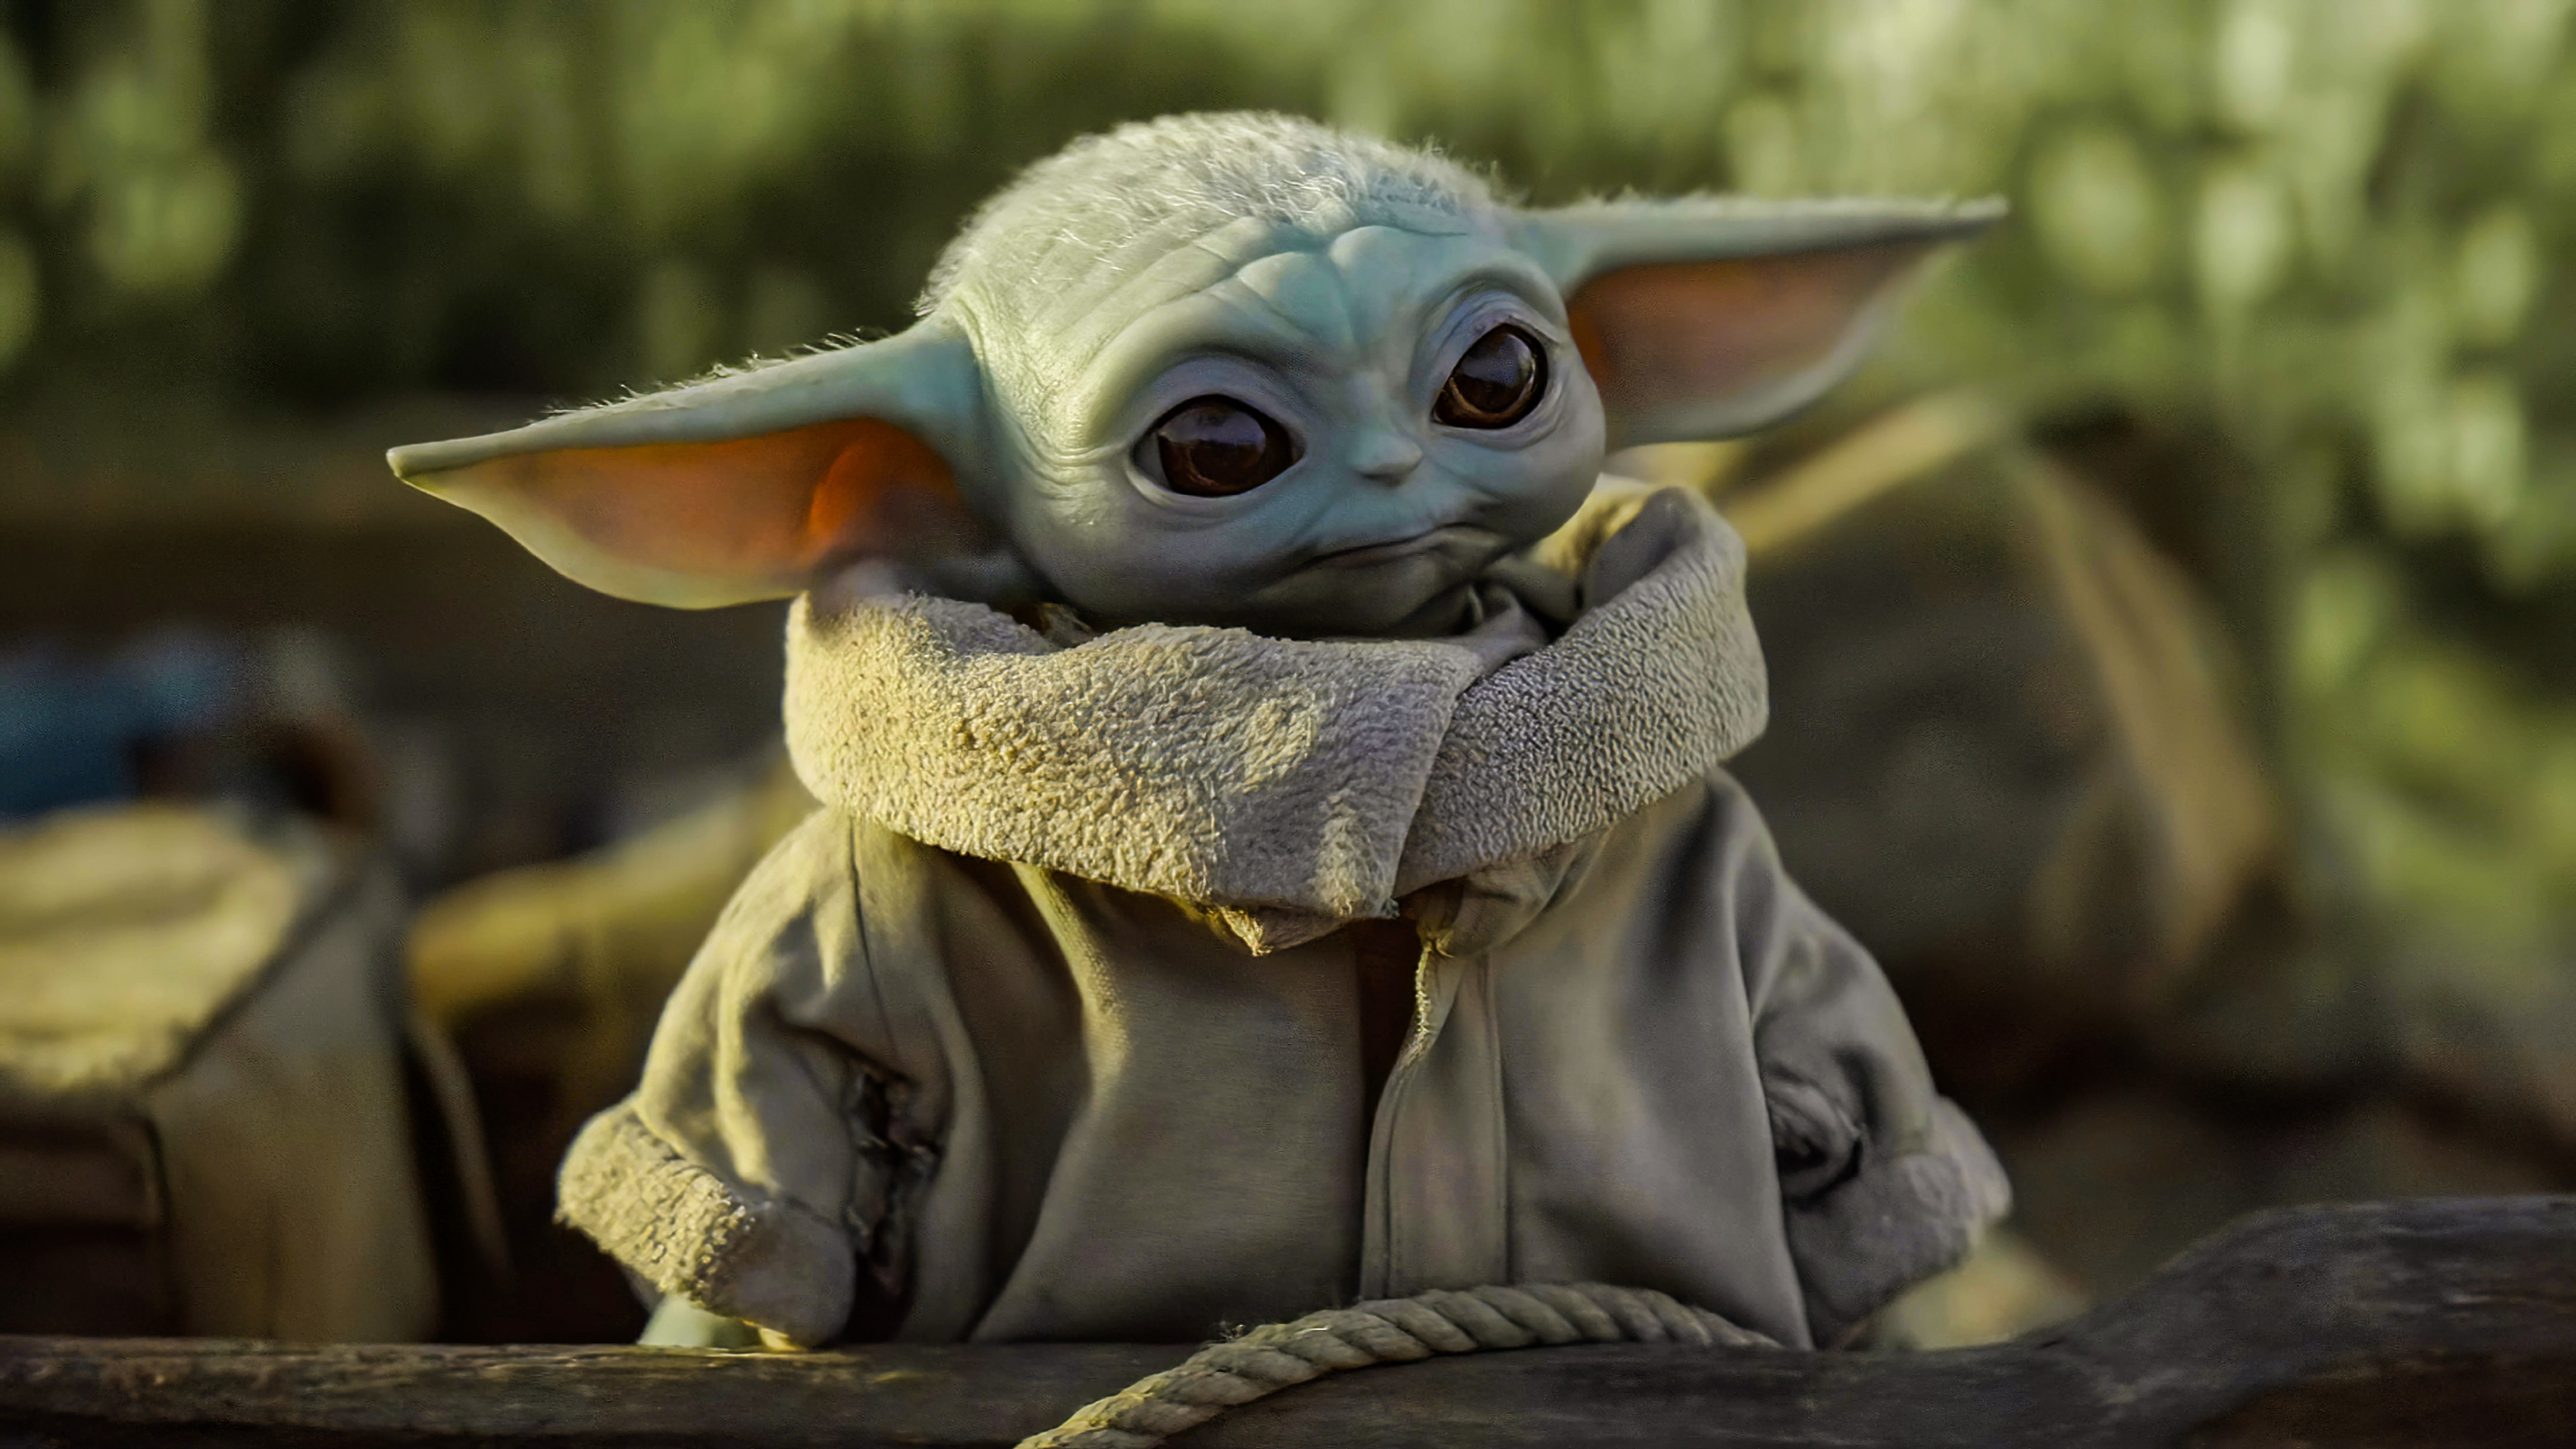 1080x2340 Star Wars Baby Yoda 2 1080x2340 Resolution Wallpaper Hd Tv Series 4k Wallpapers Images Photos And Background Wallpapers Den